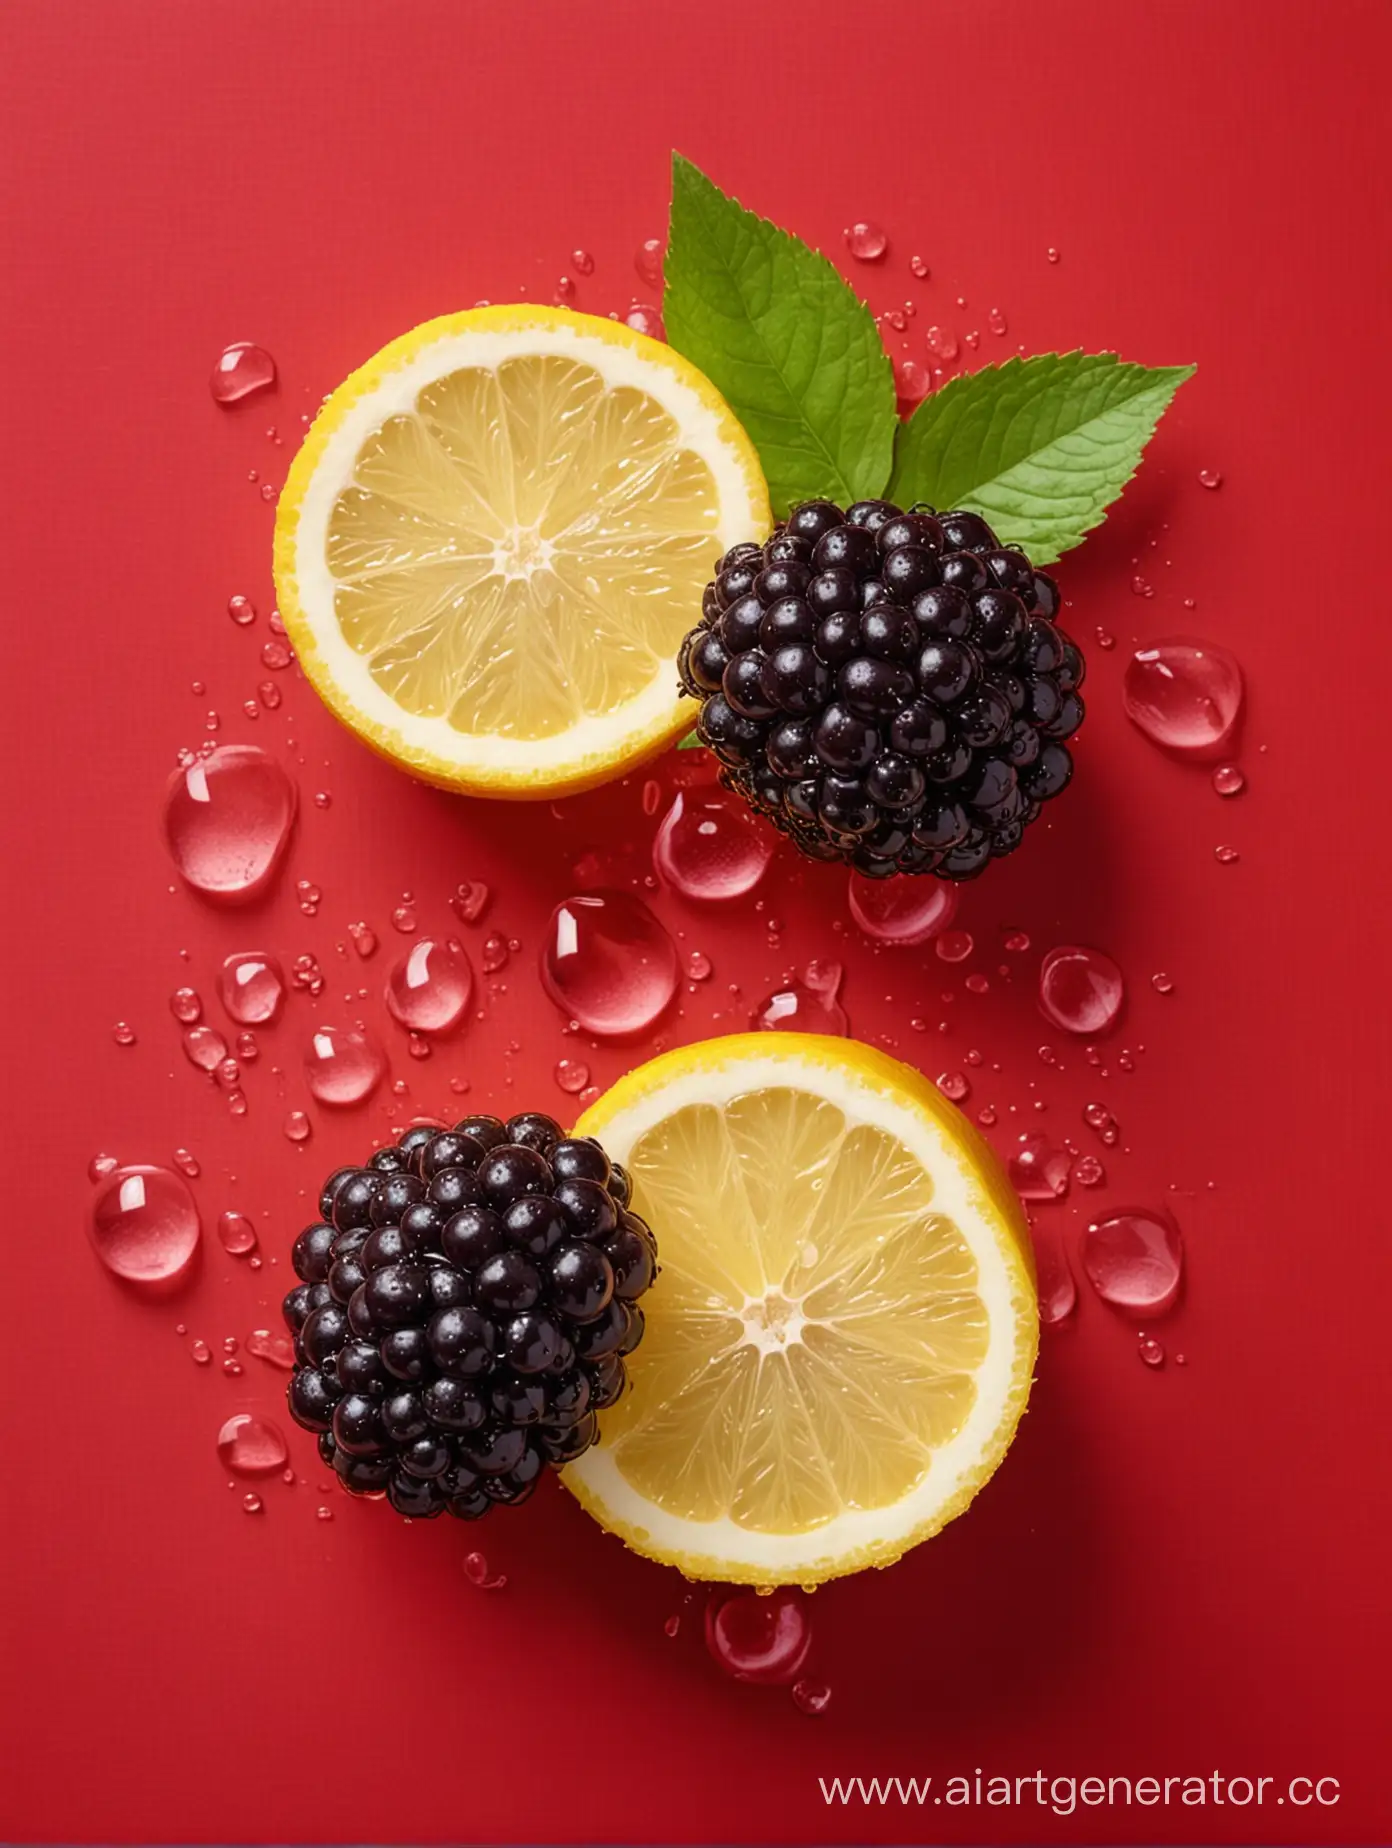 Boysenberry-and-Lemon-Slices-on-Crimson-Background-with-Water-Droplets